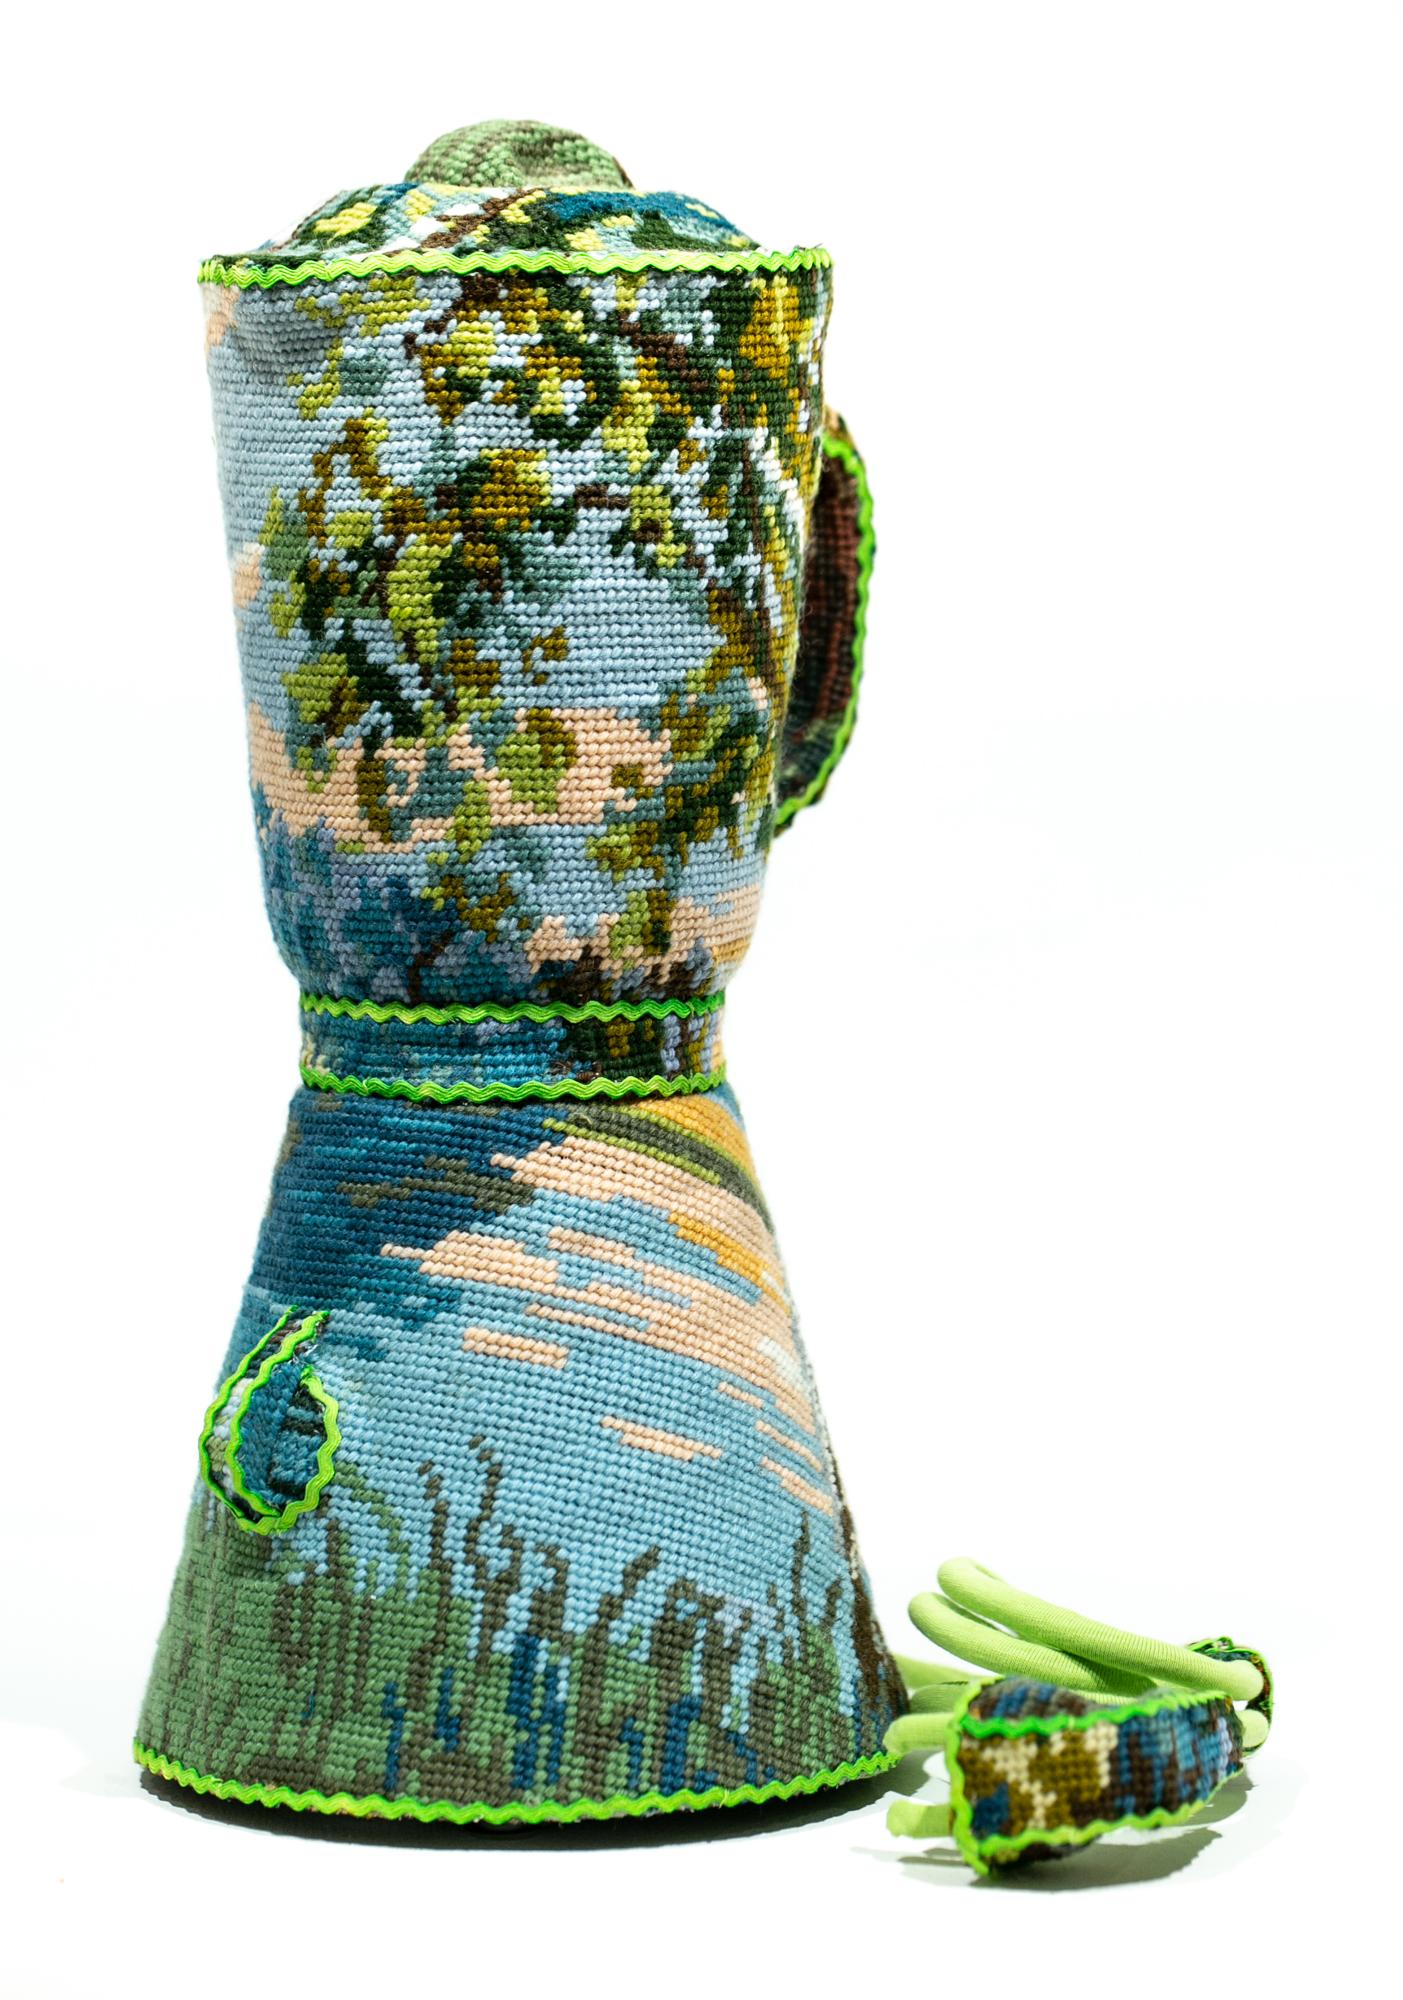 "Blender", Found Object Sculpture, Needlepoint Embroidery, Textile Art